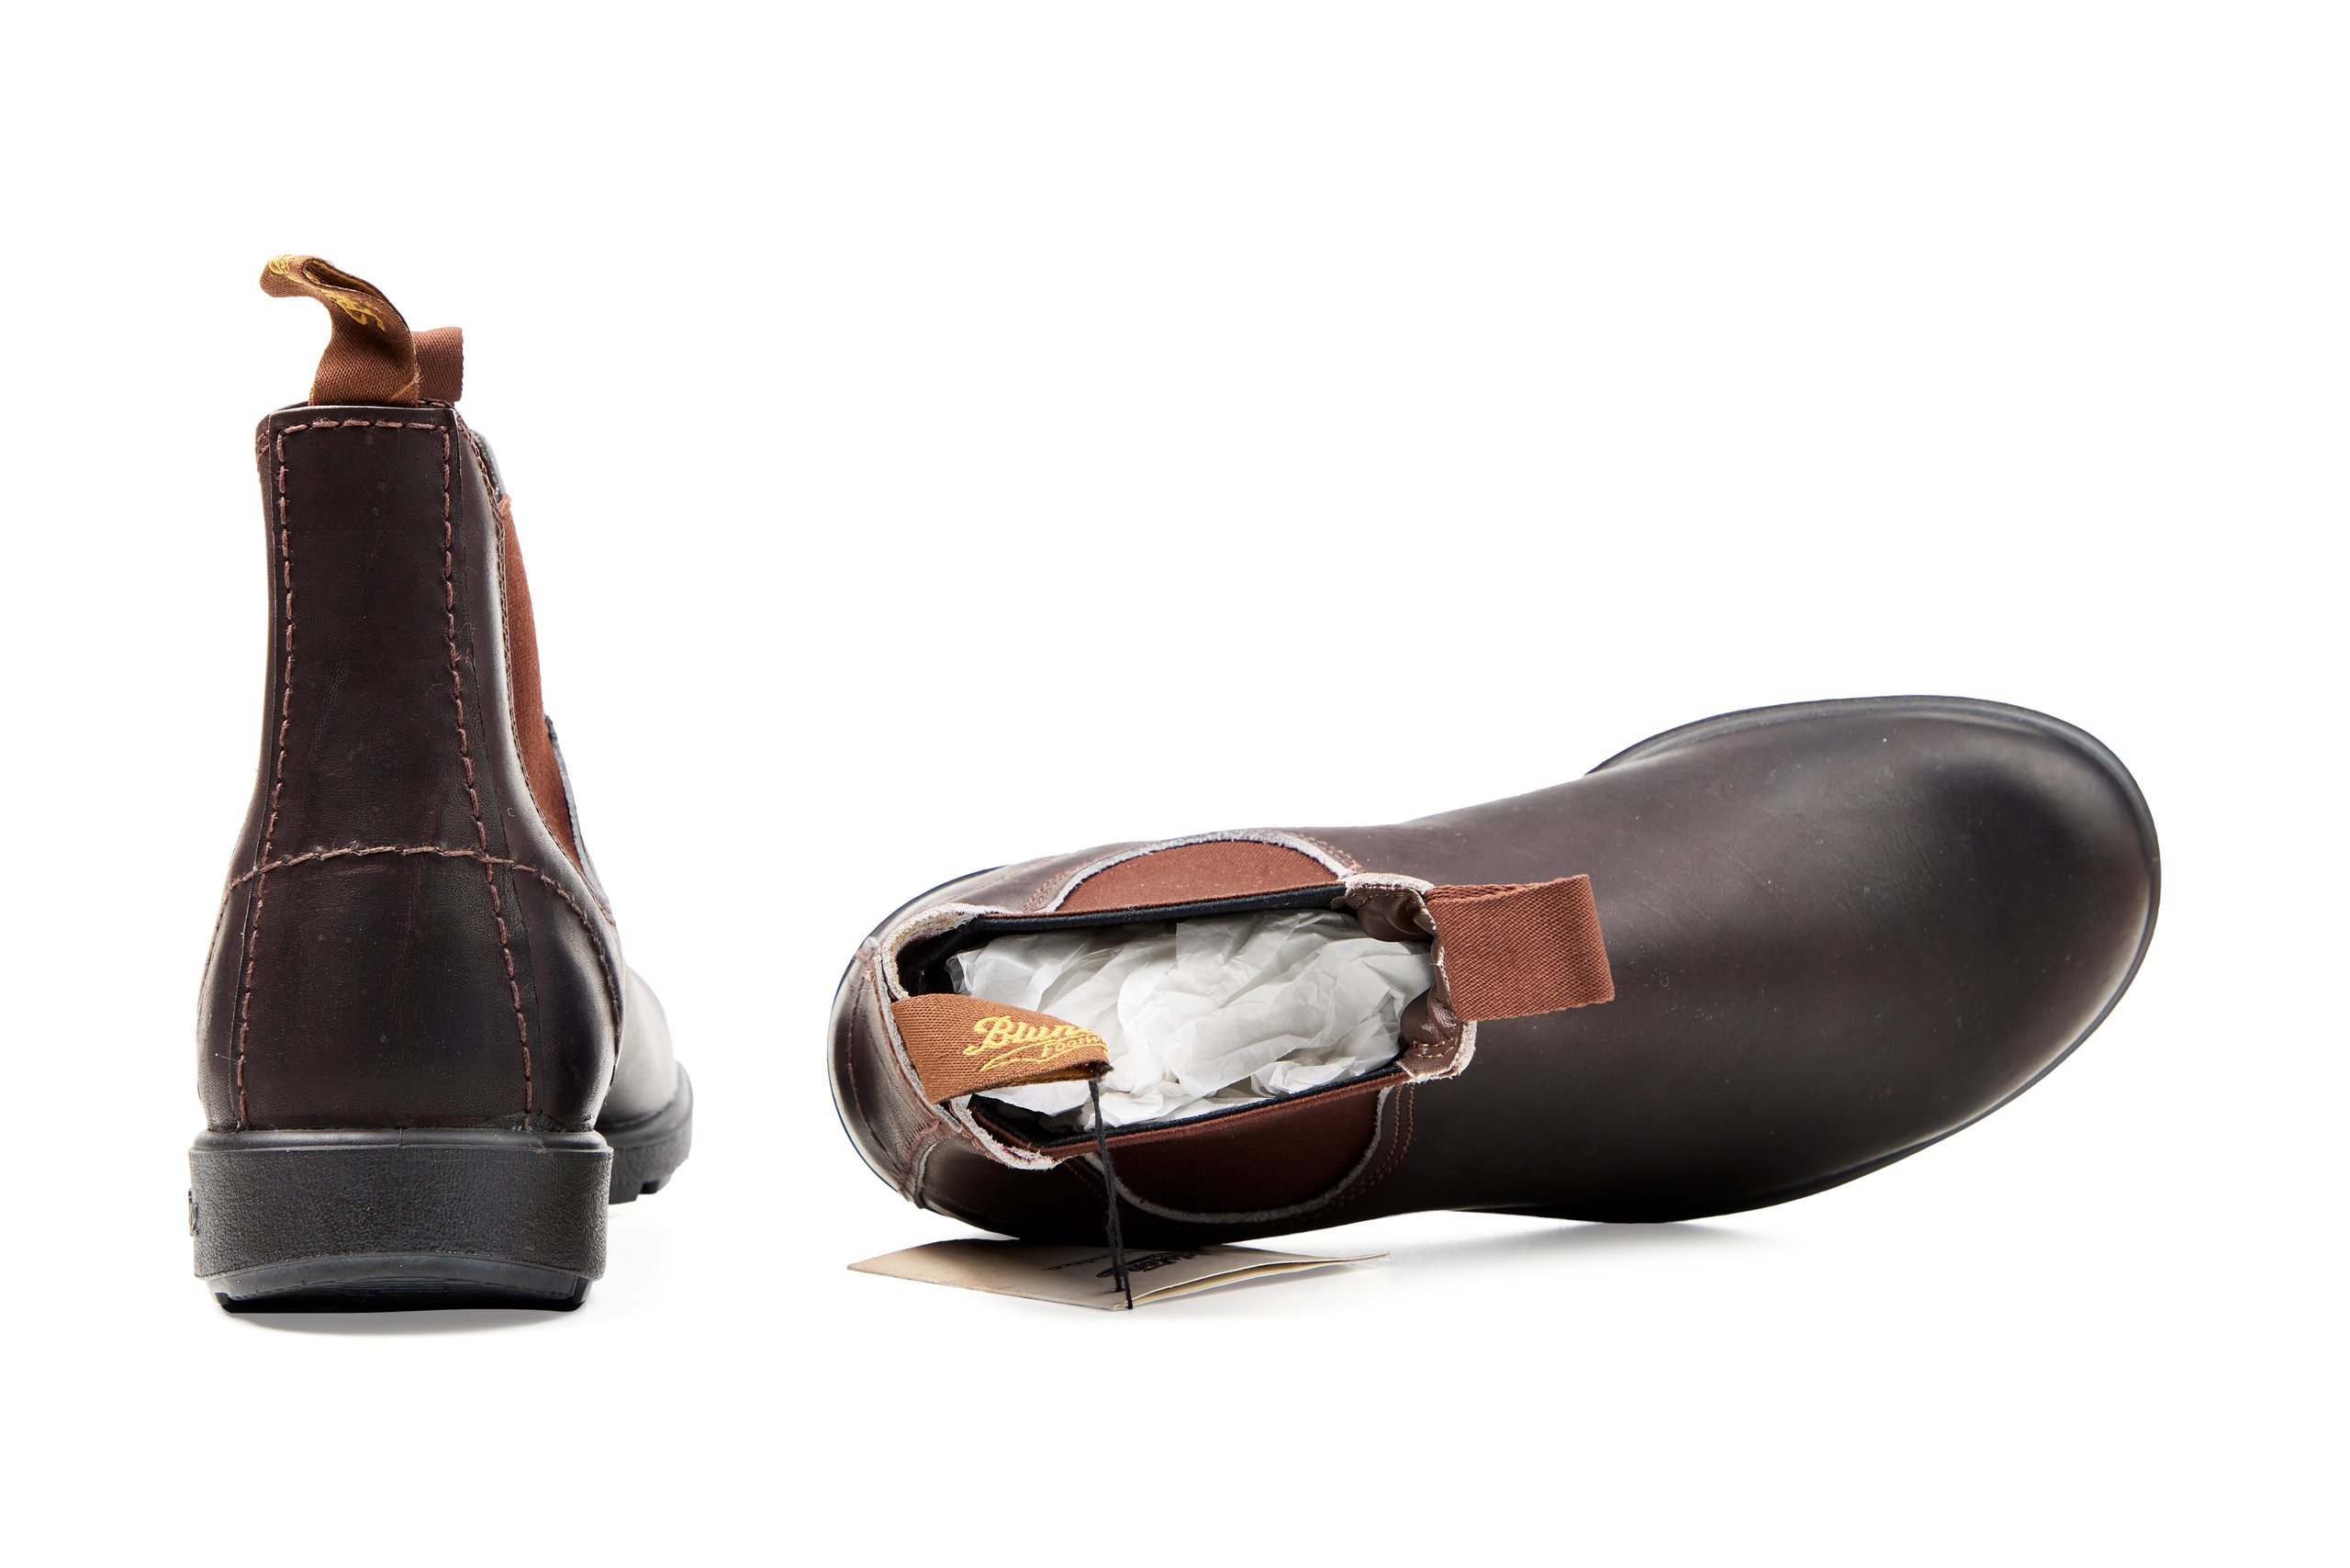 Pair of '505' unisex boots with shoebox by Blundstone